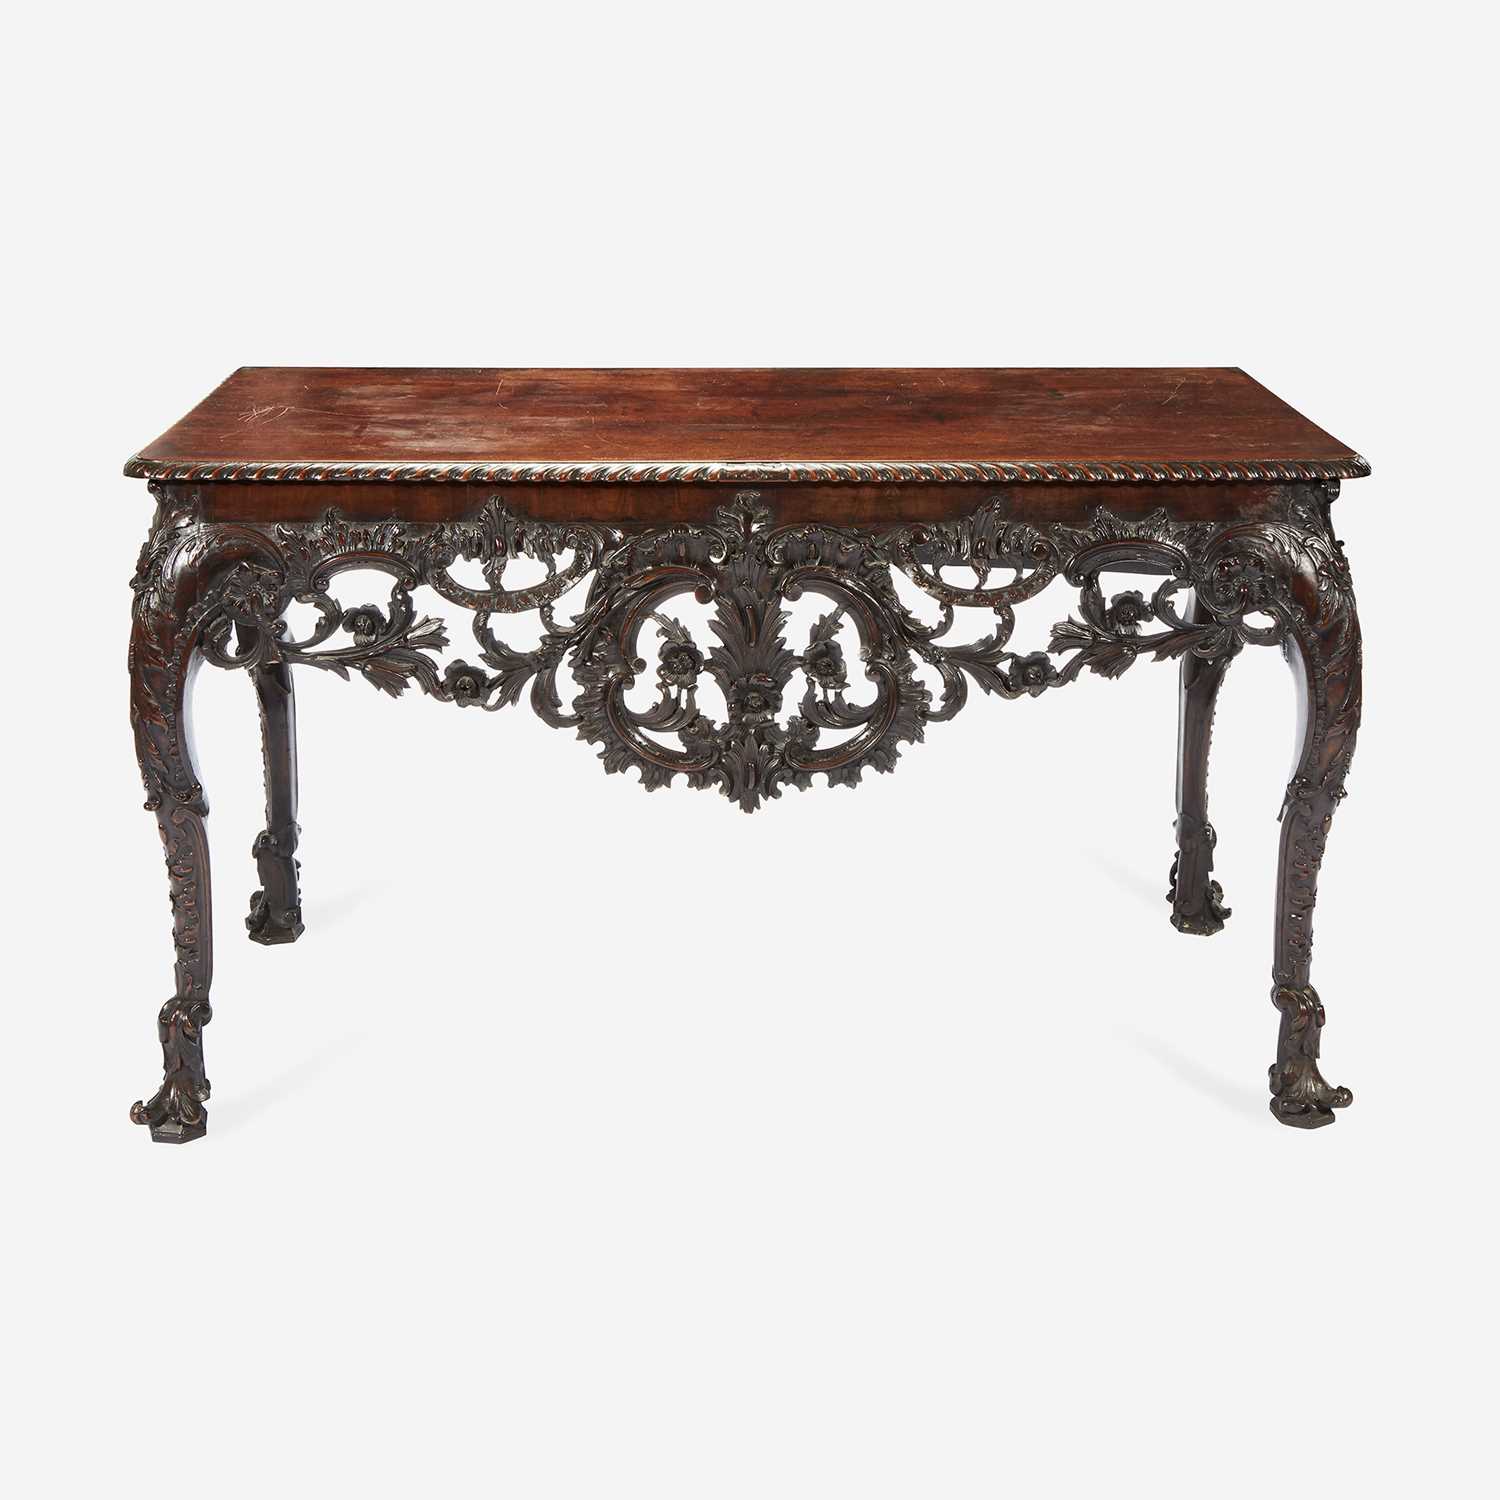 Lot 106 - A George II Carved Mahogany Console Table